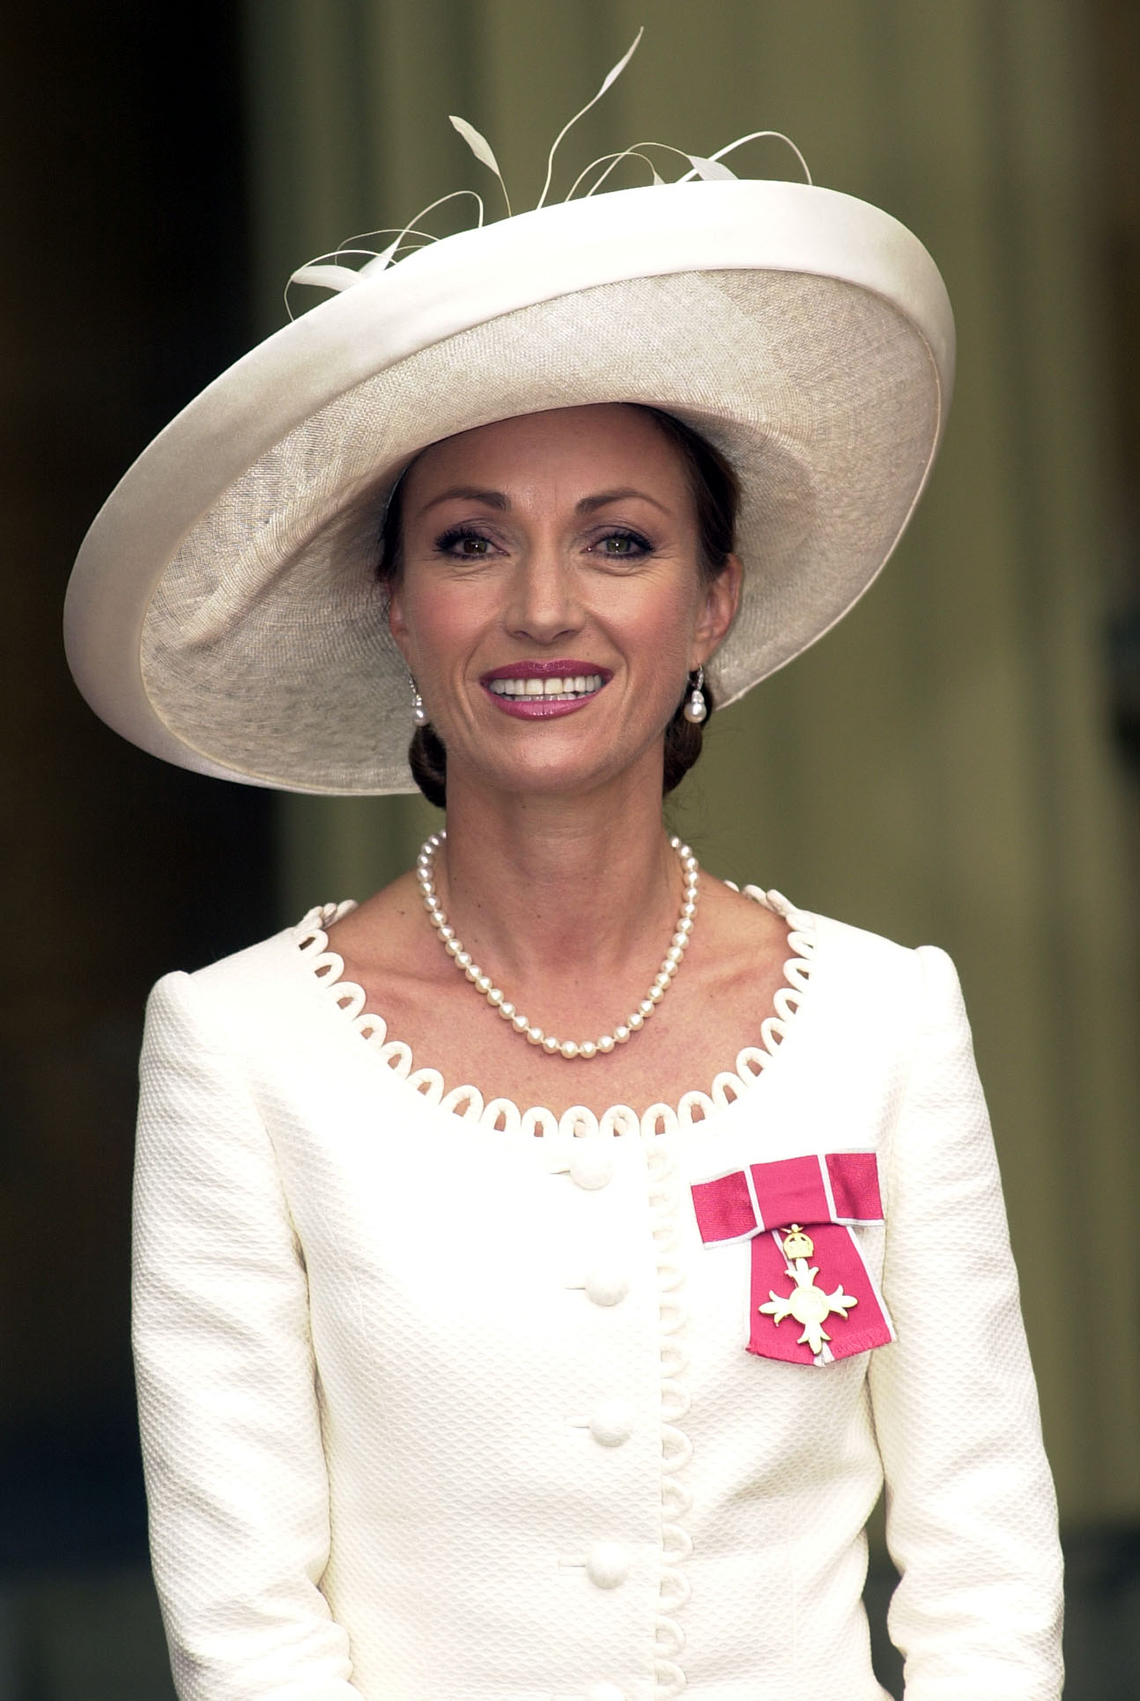 Actress Jane Seymour at Buckingham Palace after receiving an OBE from Queen Elizabeth II